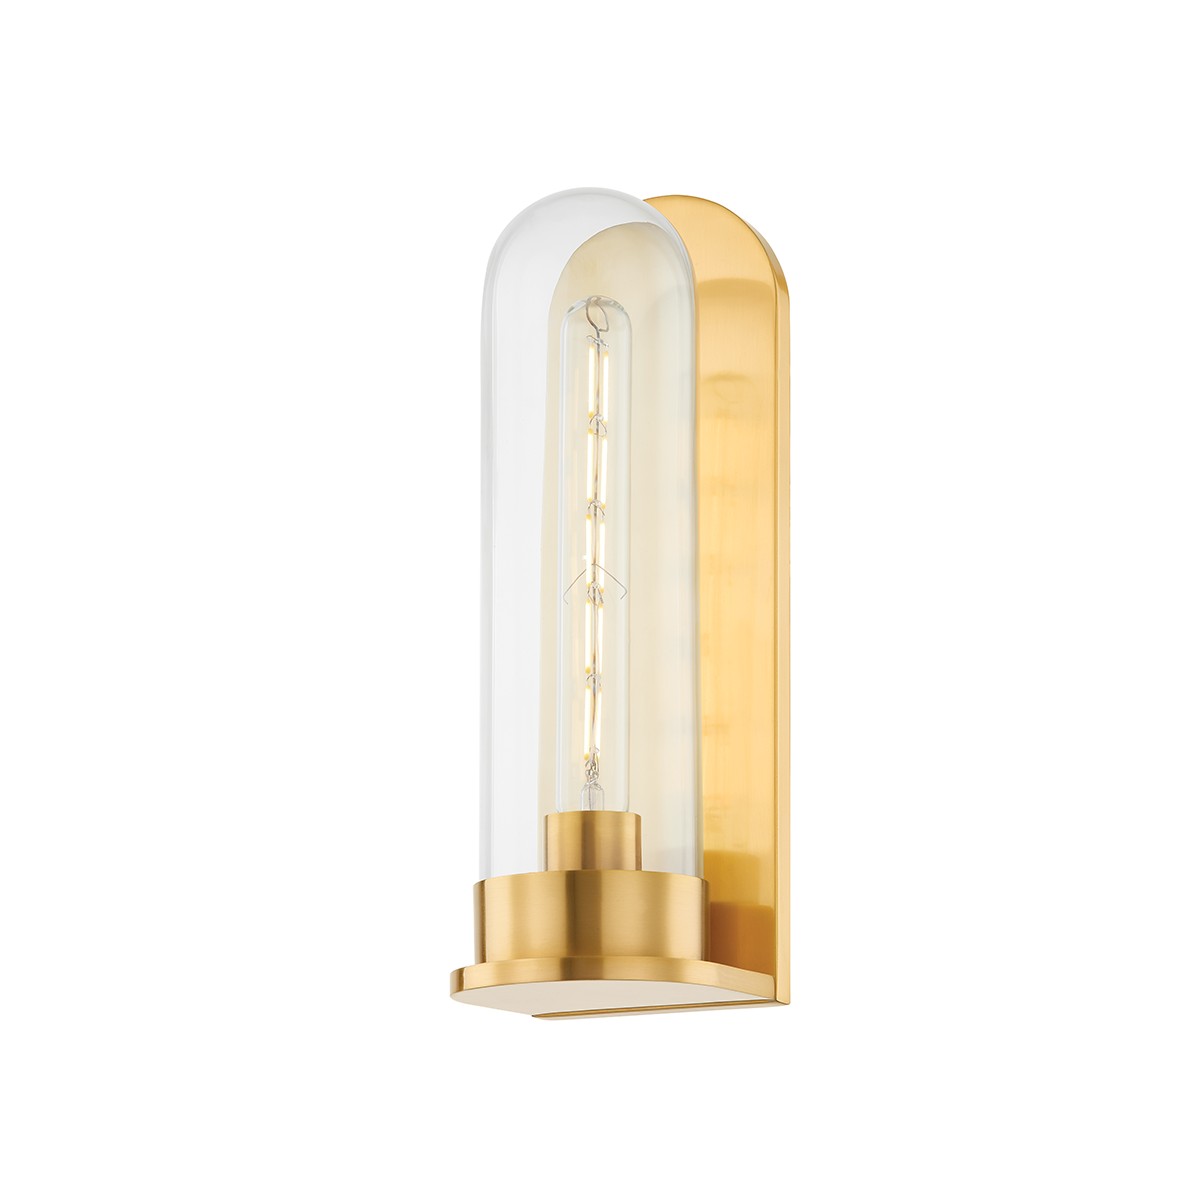 Hudson Valley - 7800-AGB - One Light Wall Sconce - Irwin - Aged Brass